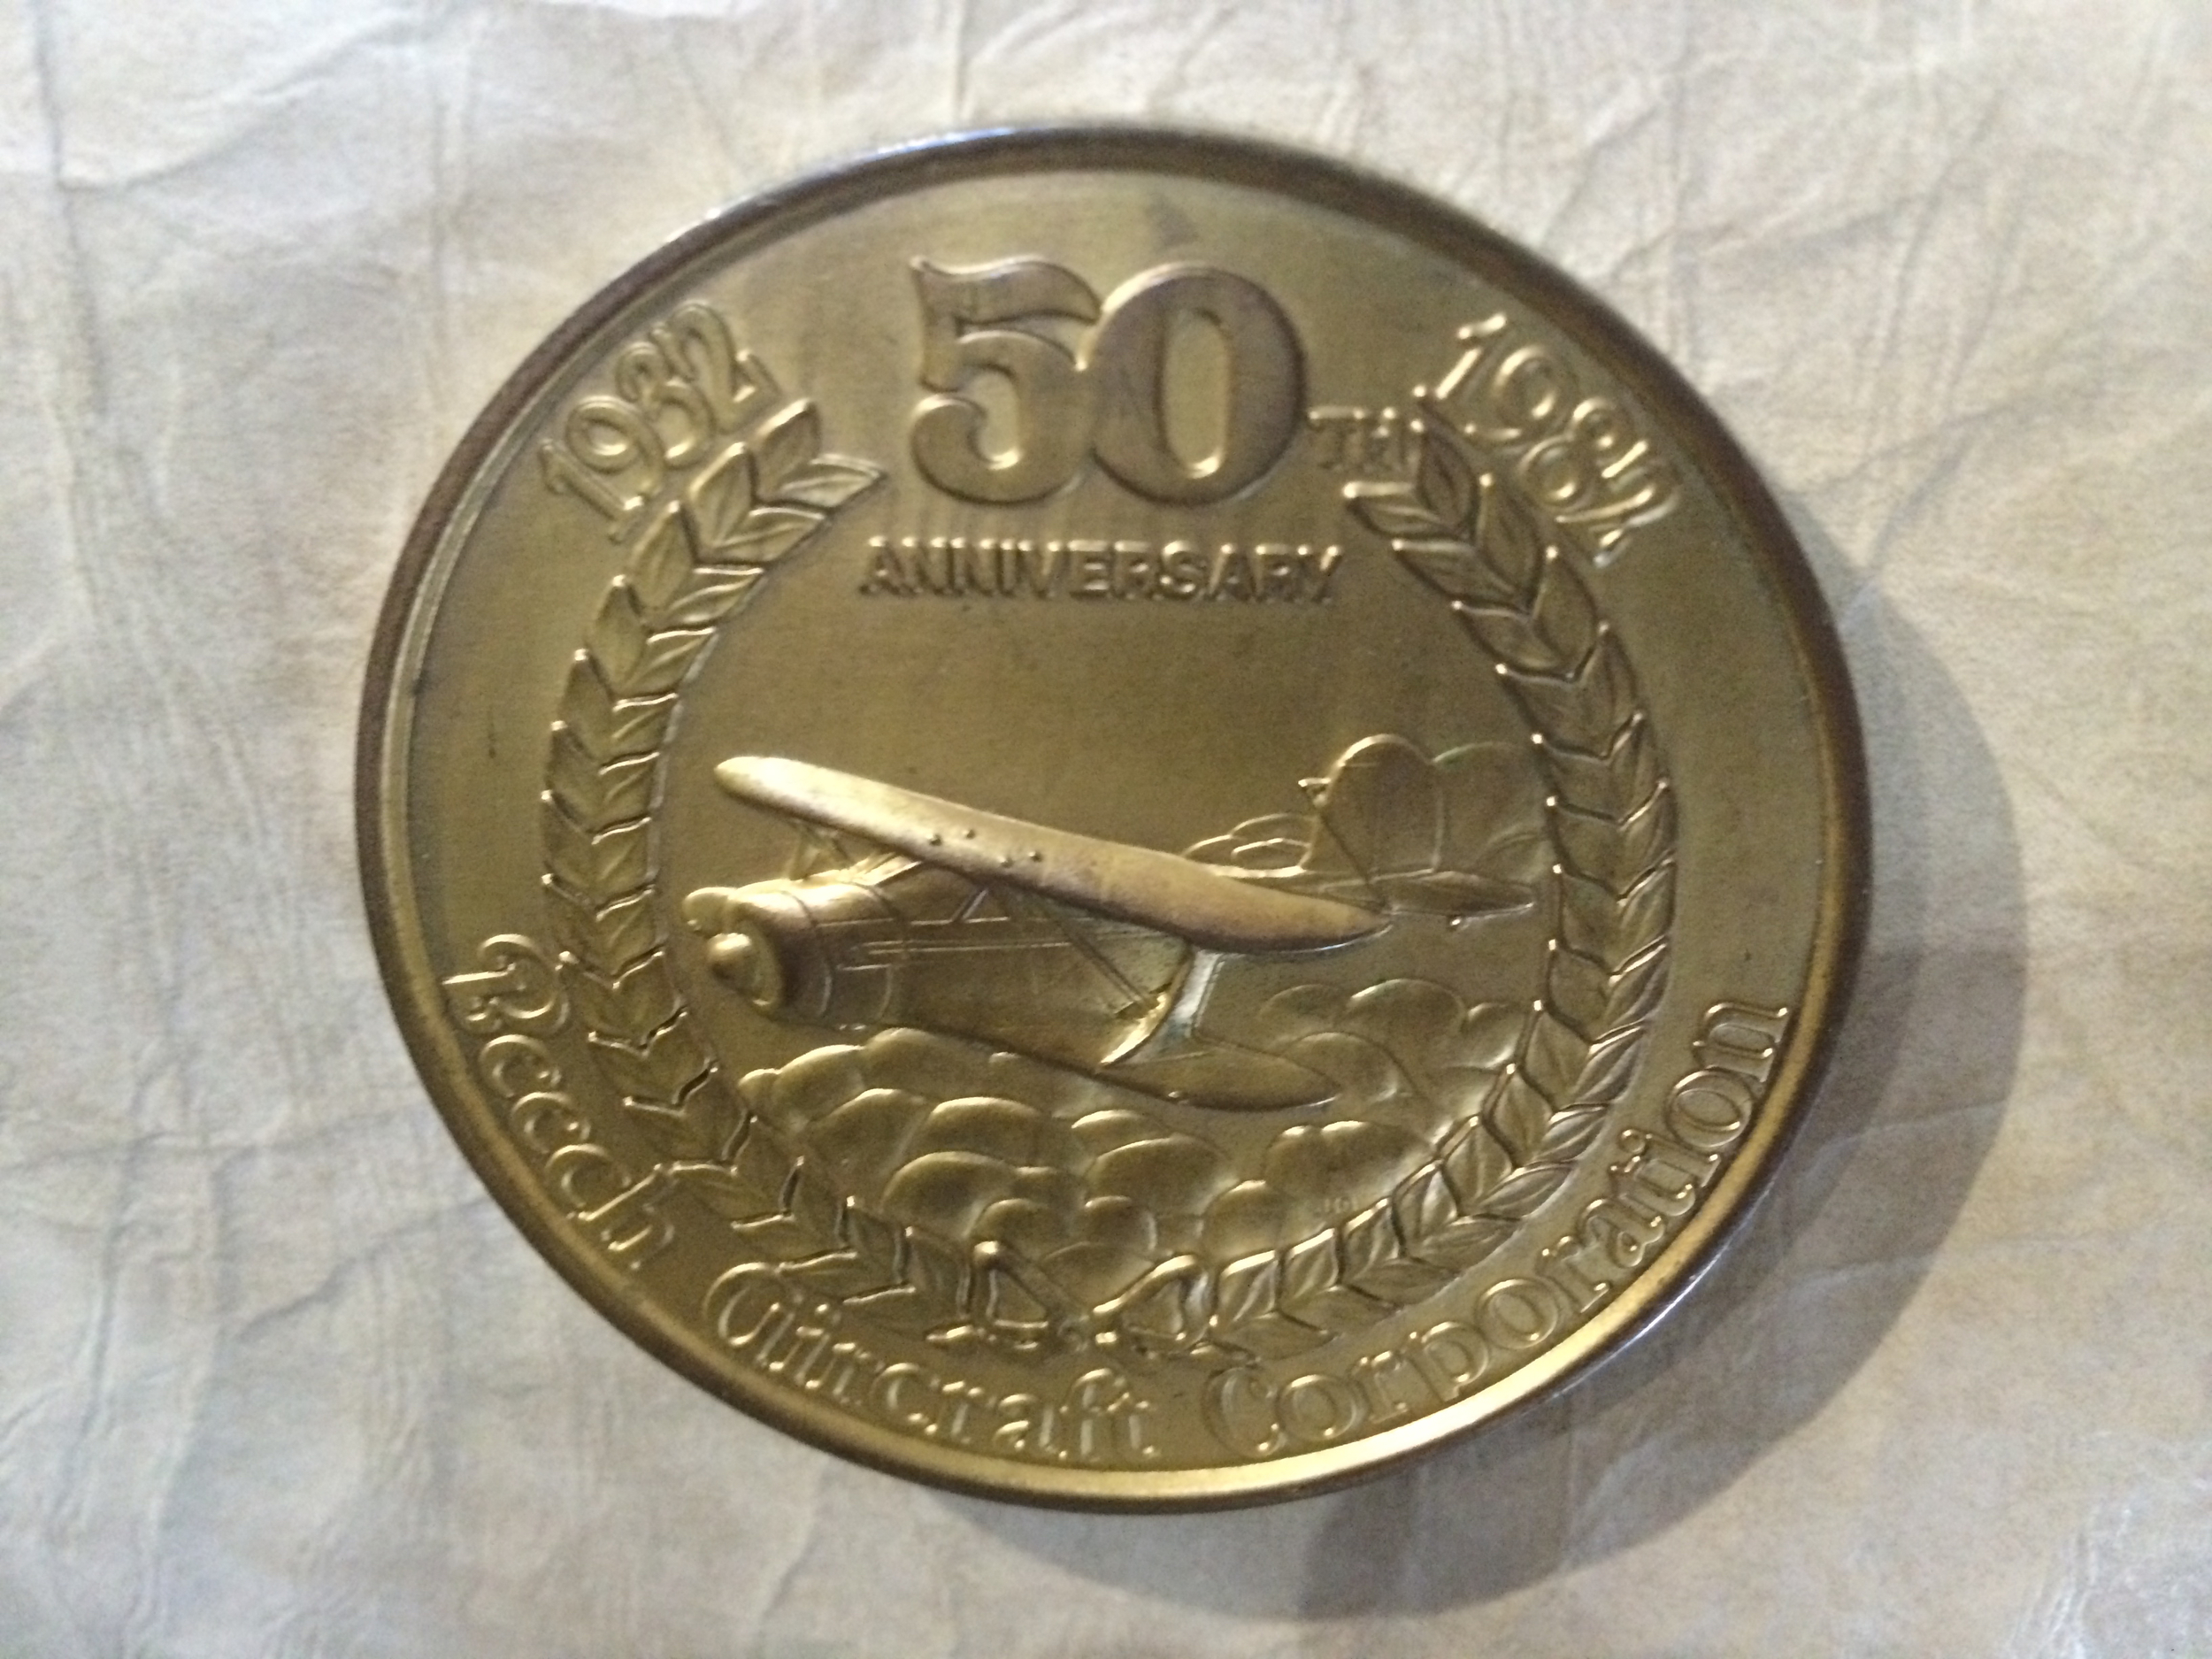  Beechcraft airplanes built in 1982 had this medal attached. 